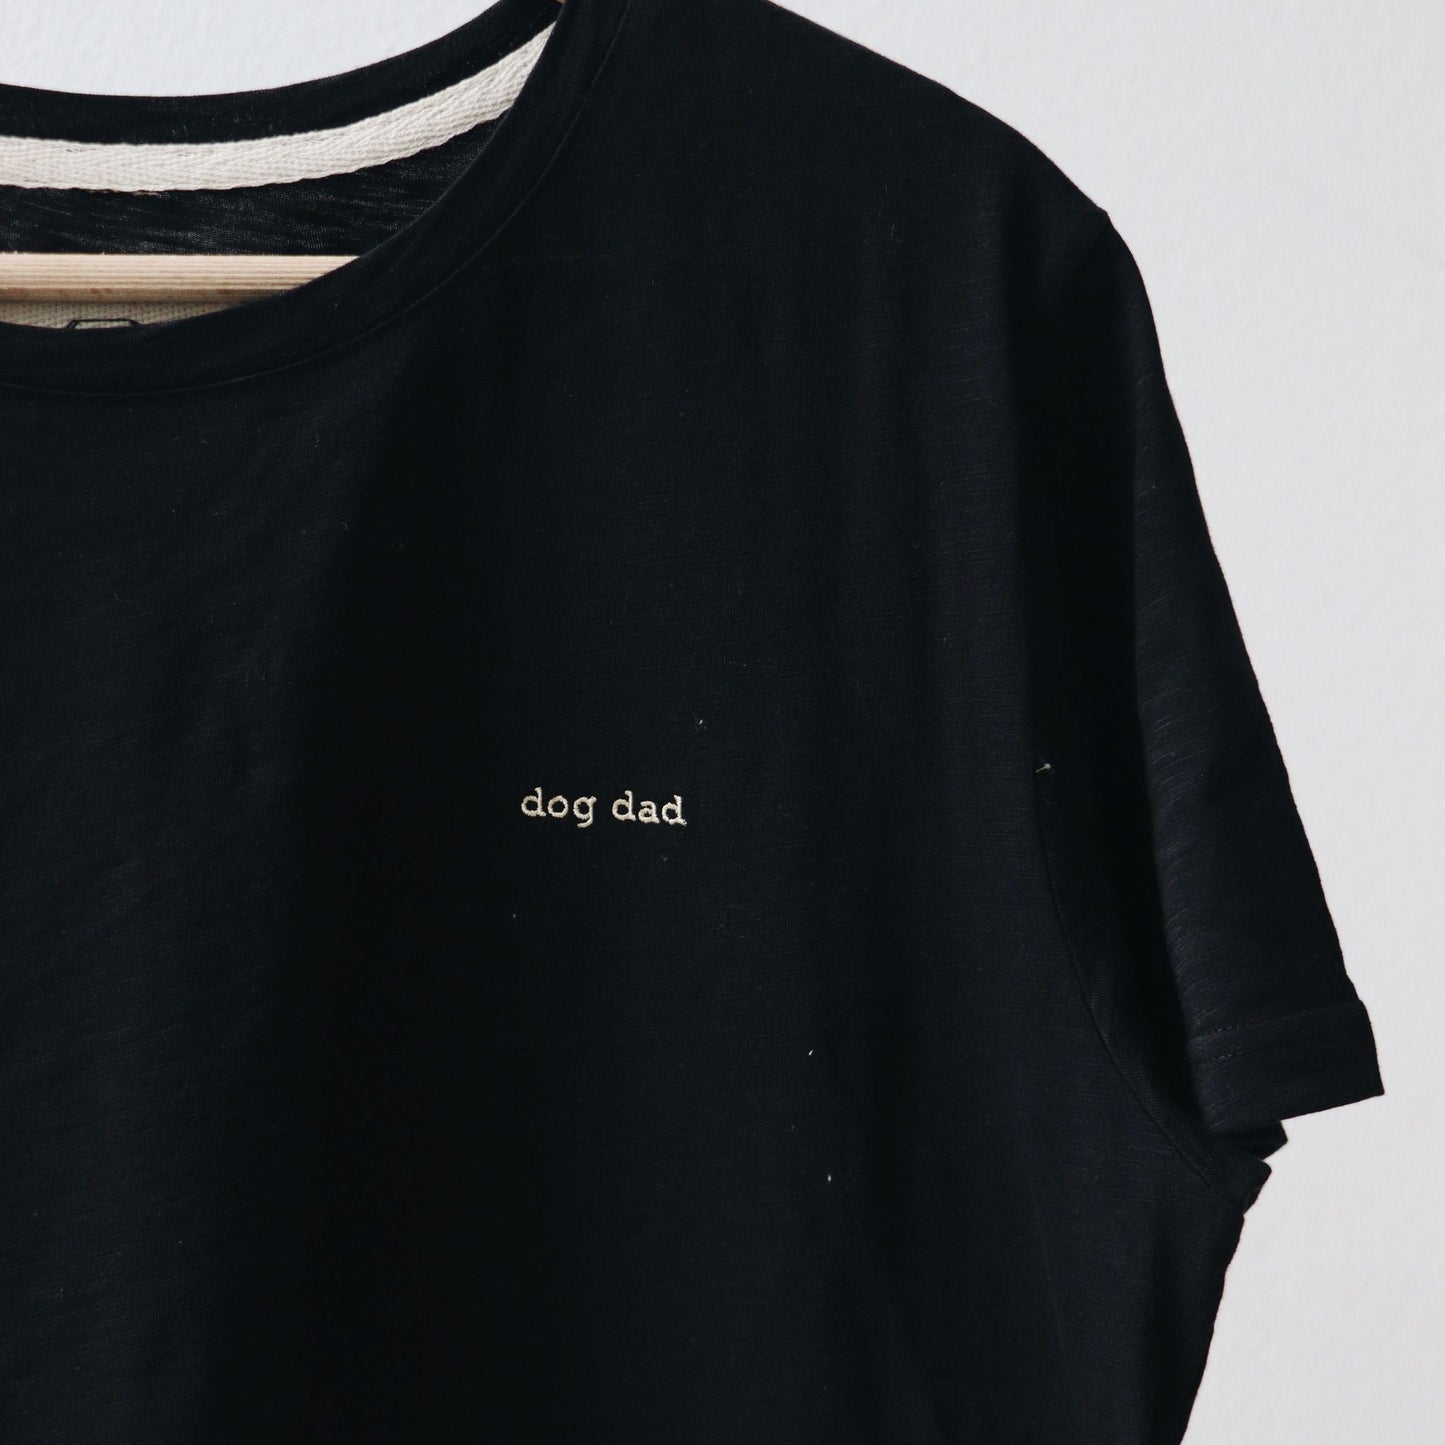 Dog Mom / Dog Dad Oversized Tshirt - made of sustainable materials - MONS BONS